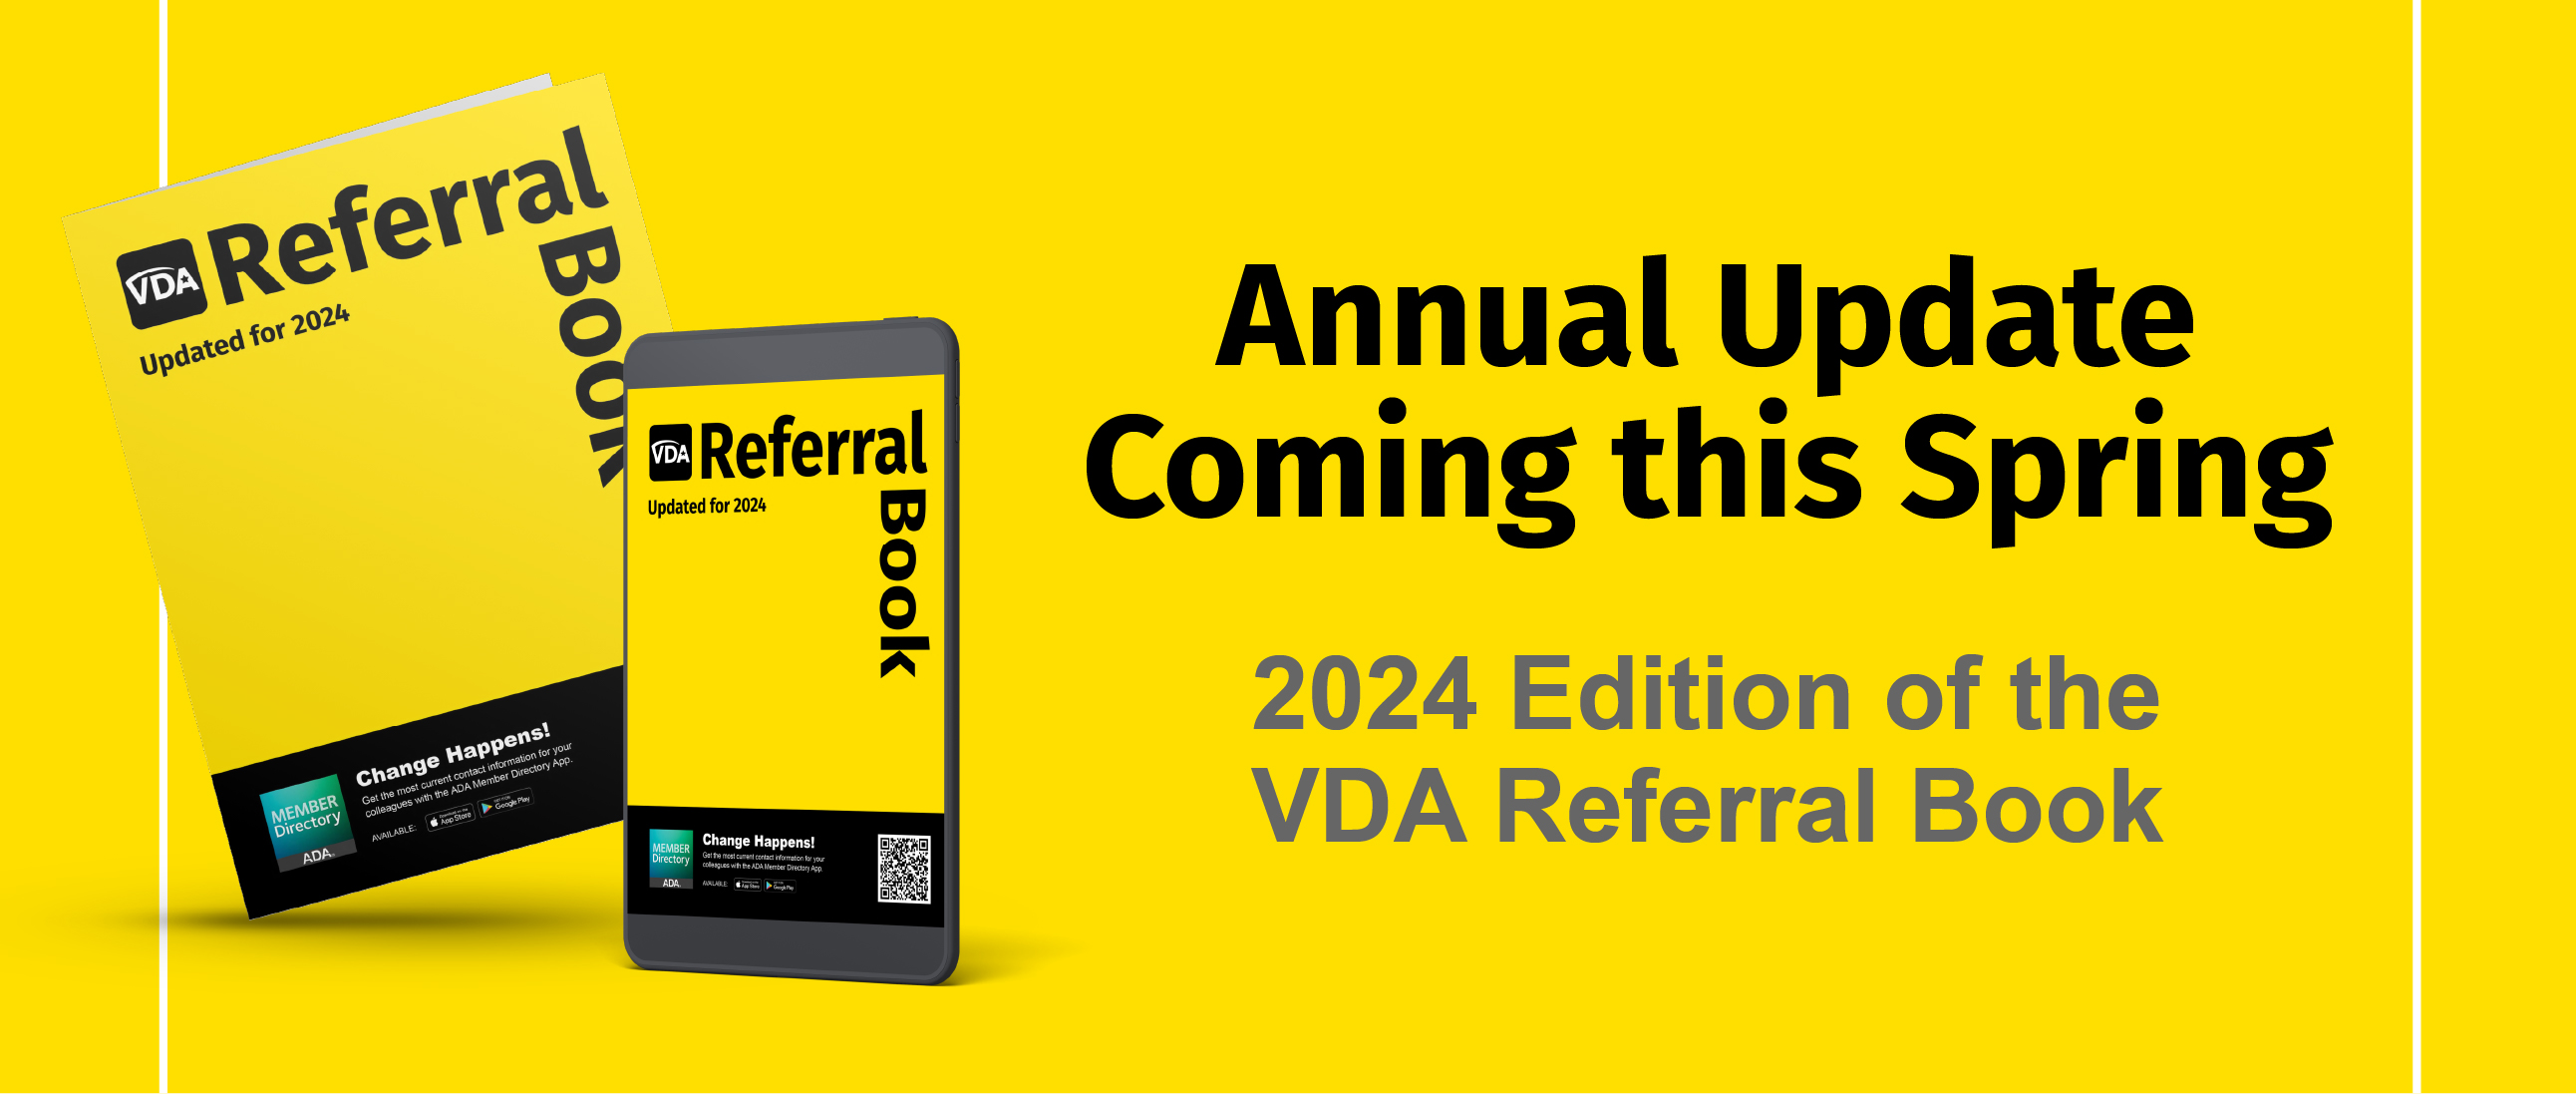 Referral Book Coming in the Spring